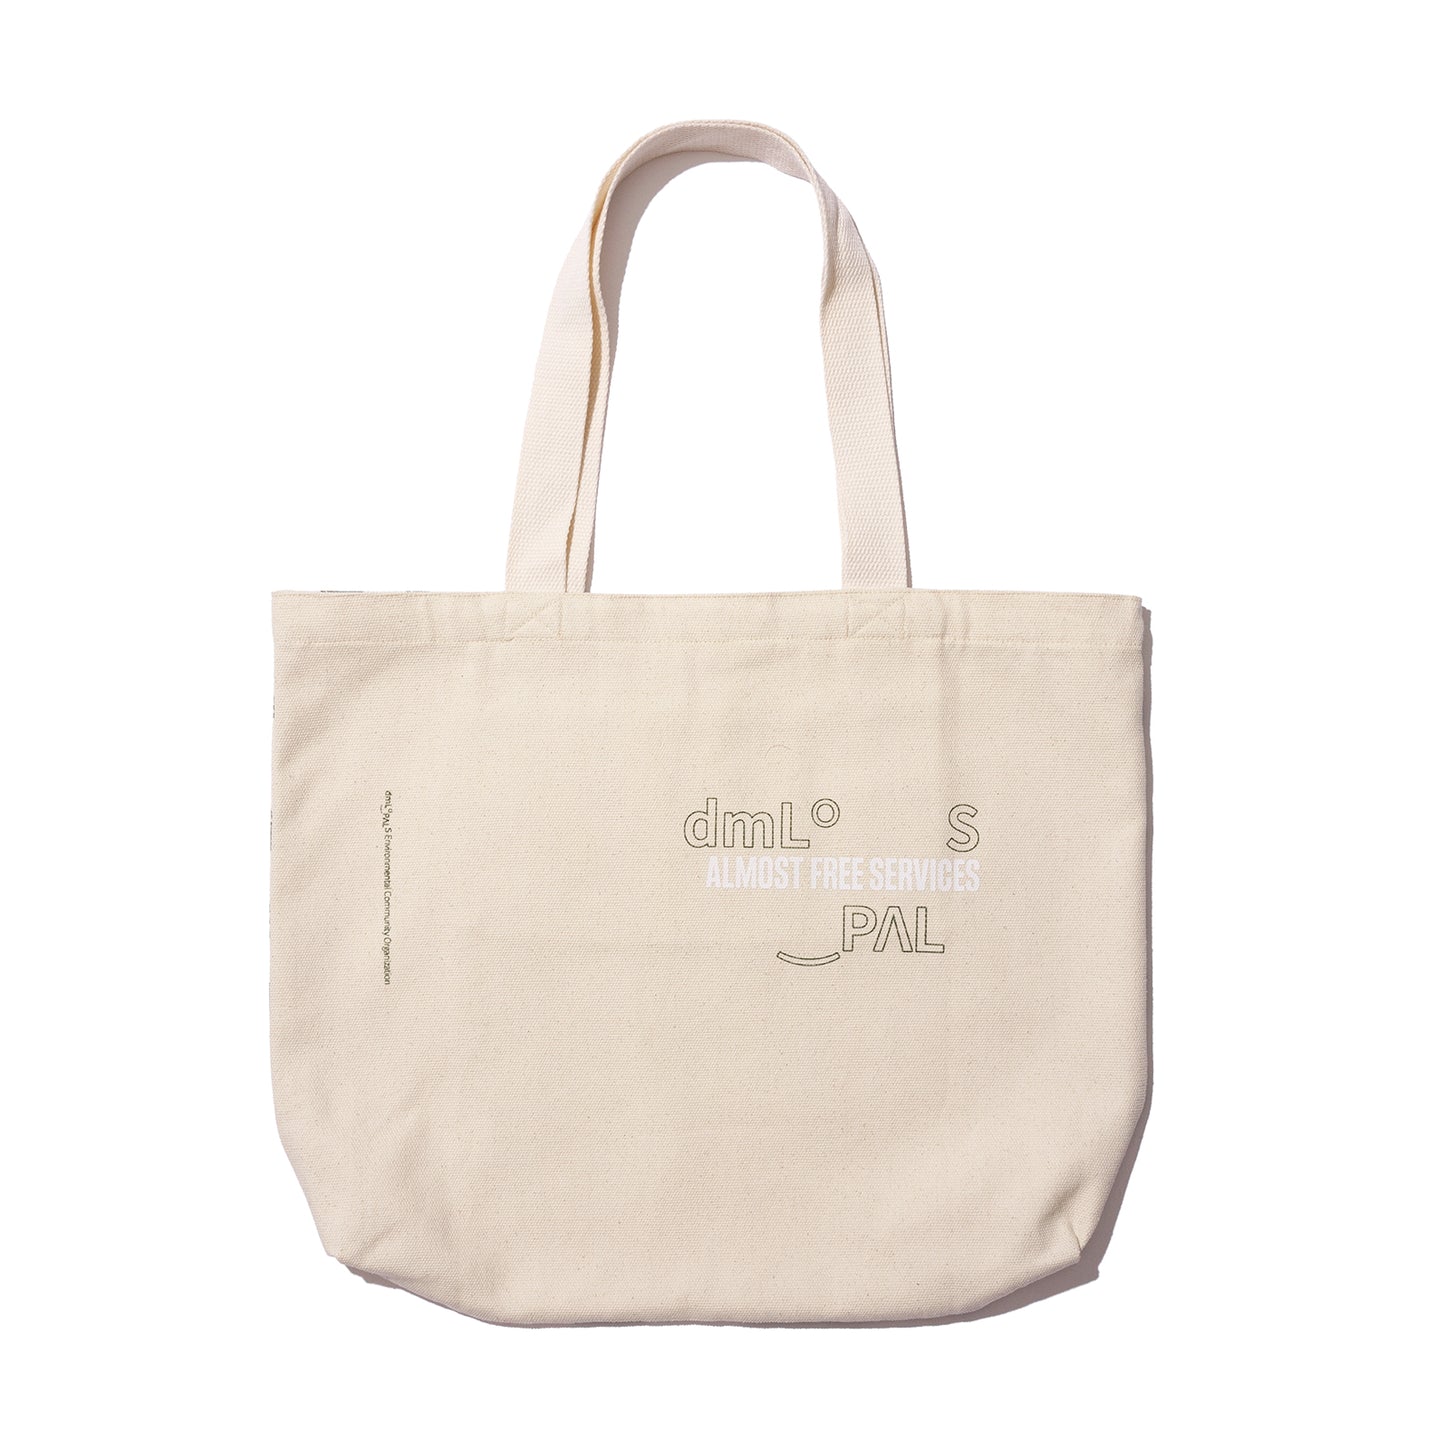 ALMOST FREE SERVICES × DML × OPALS “THE HOUSE” TOTE BAG